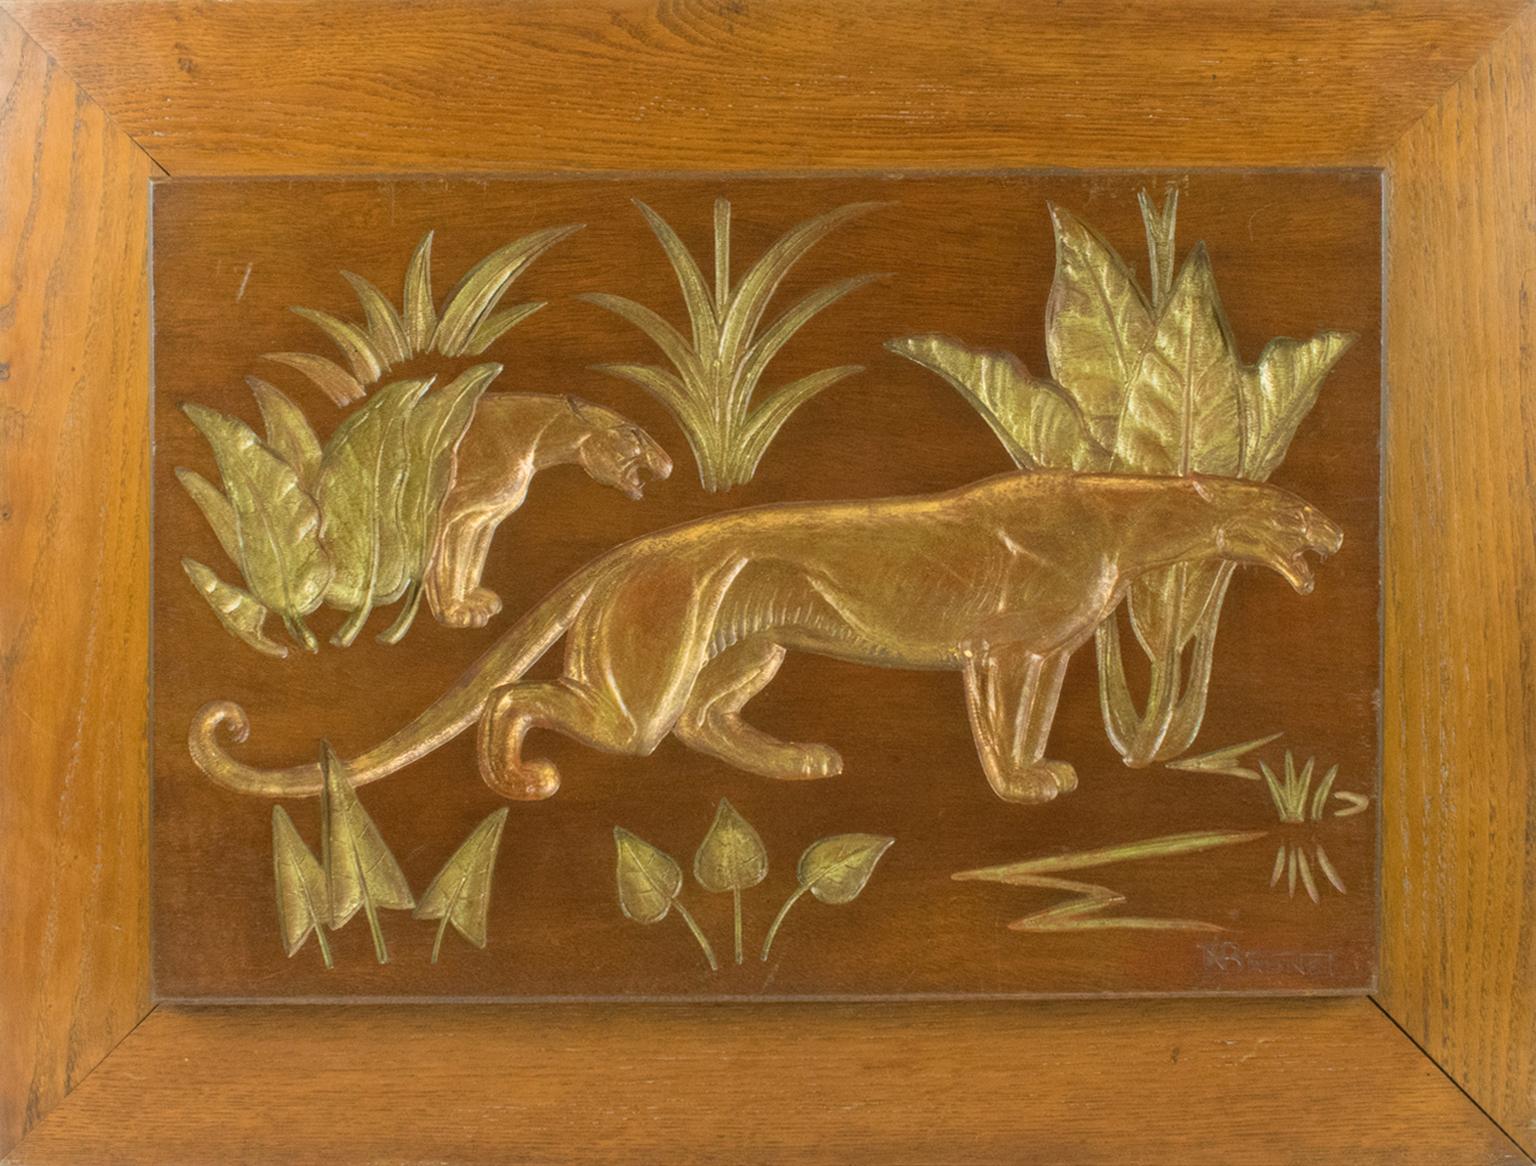 Panthers in the Jungle Art Deco Carved Gilt Wood Panel by N. R. Brunet